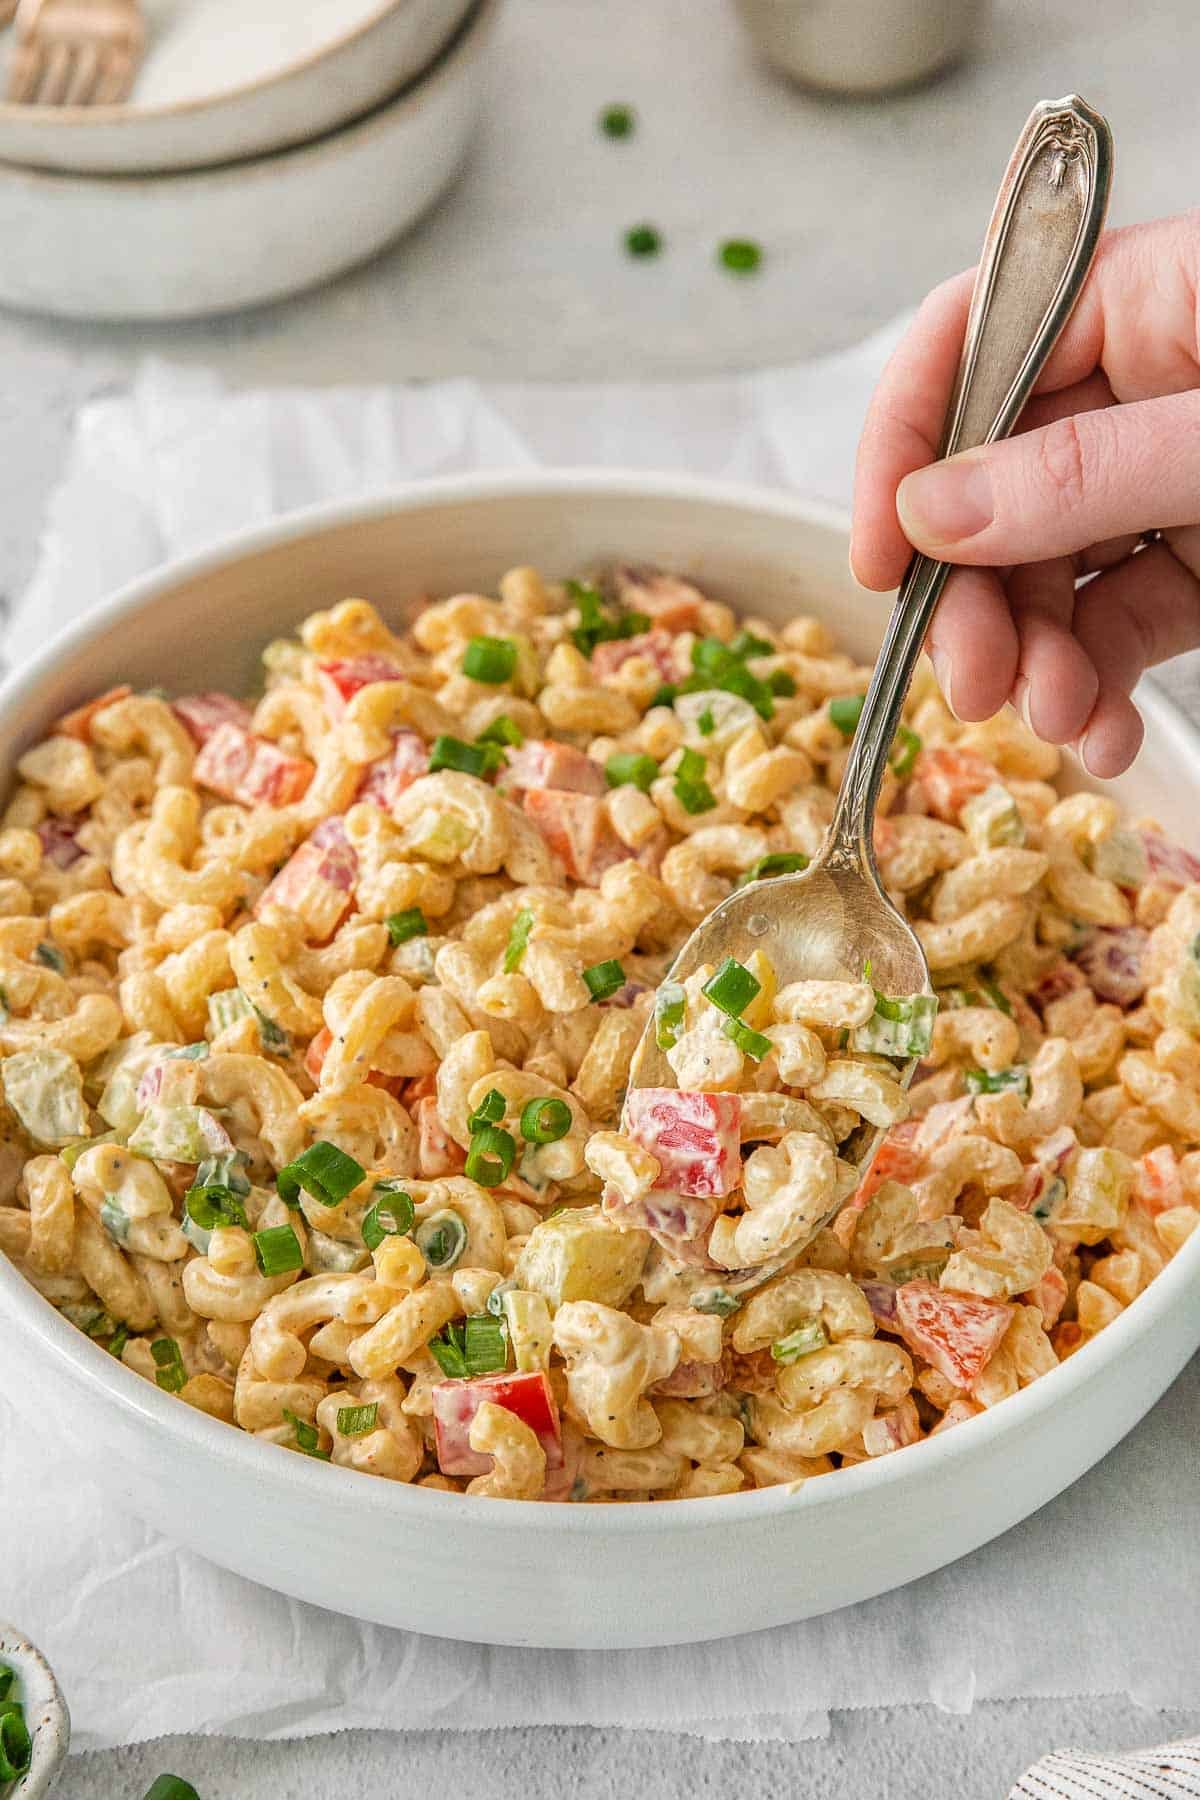 Macaroni Salad in white bowl with women holding spoon.